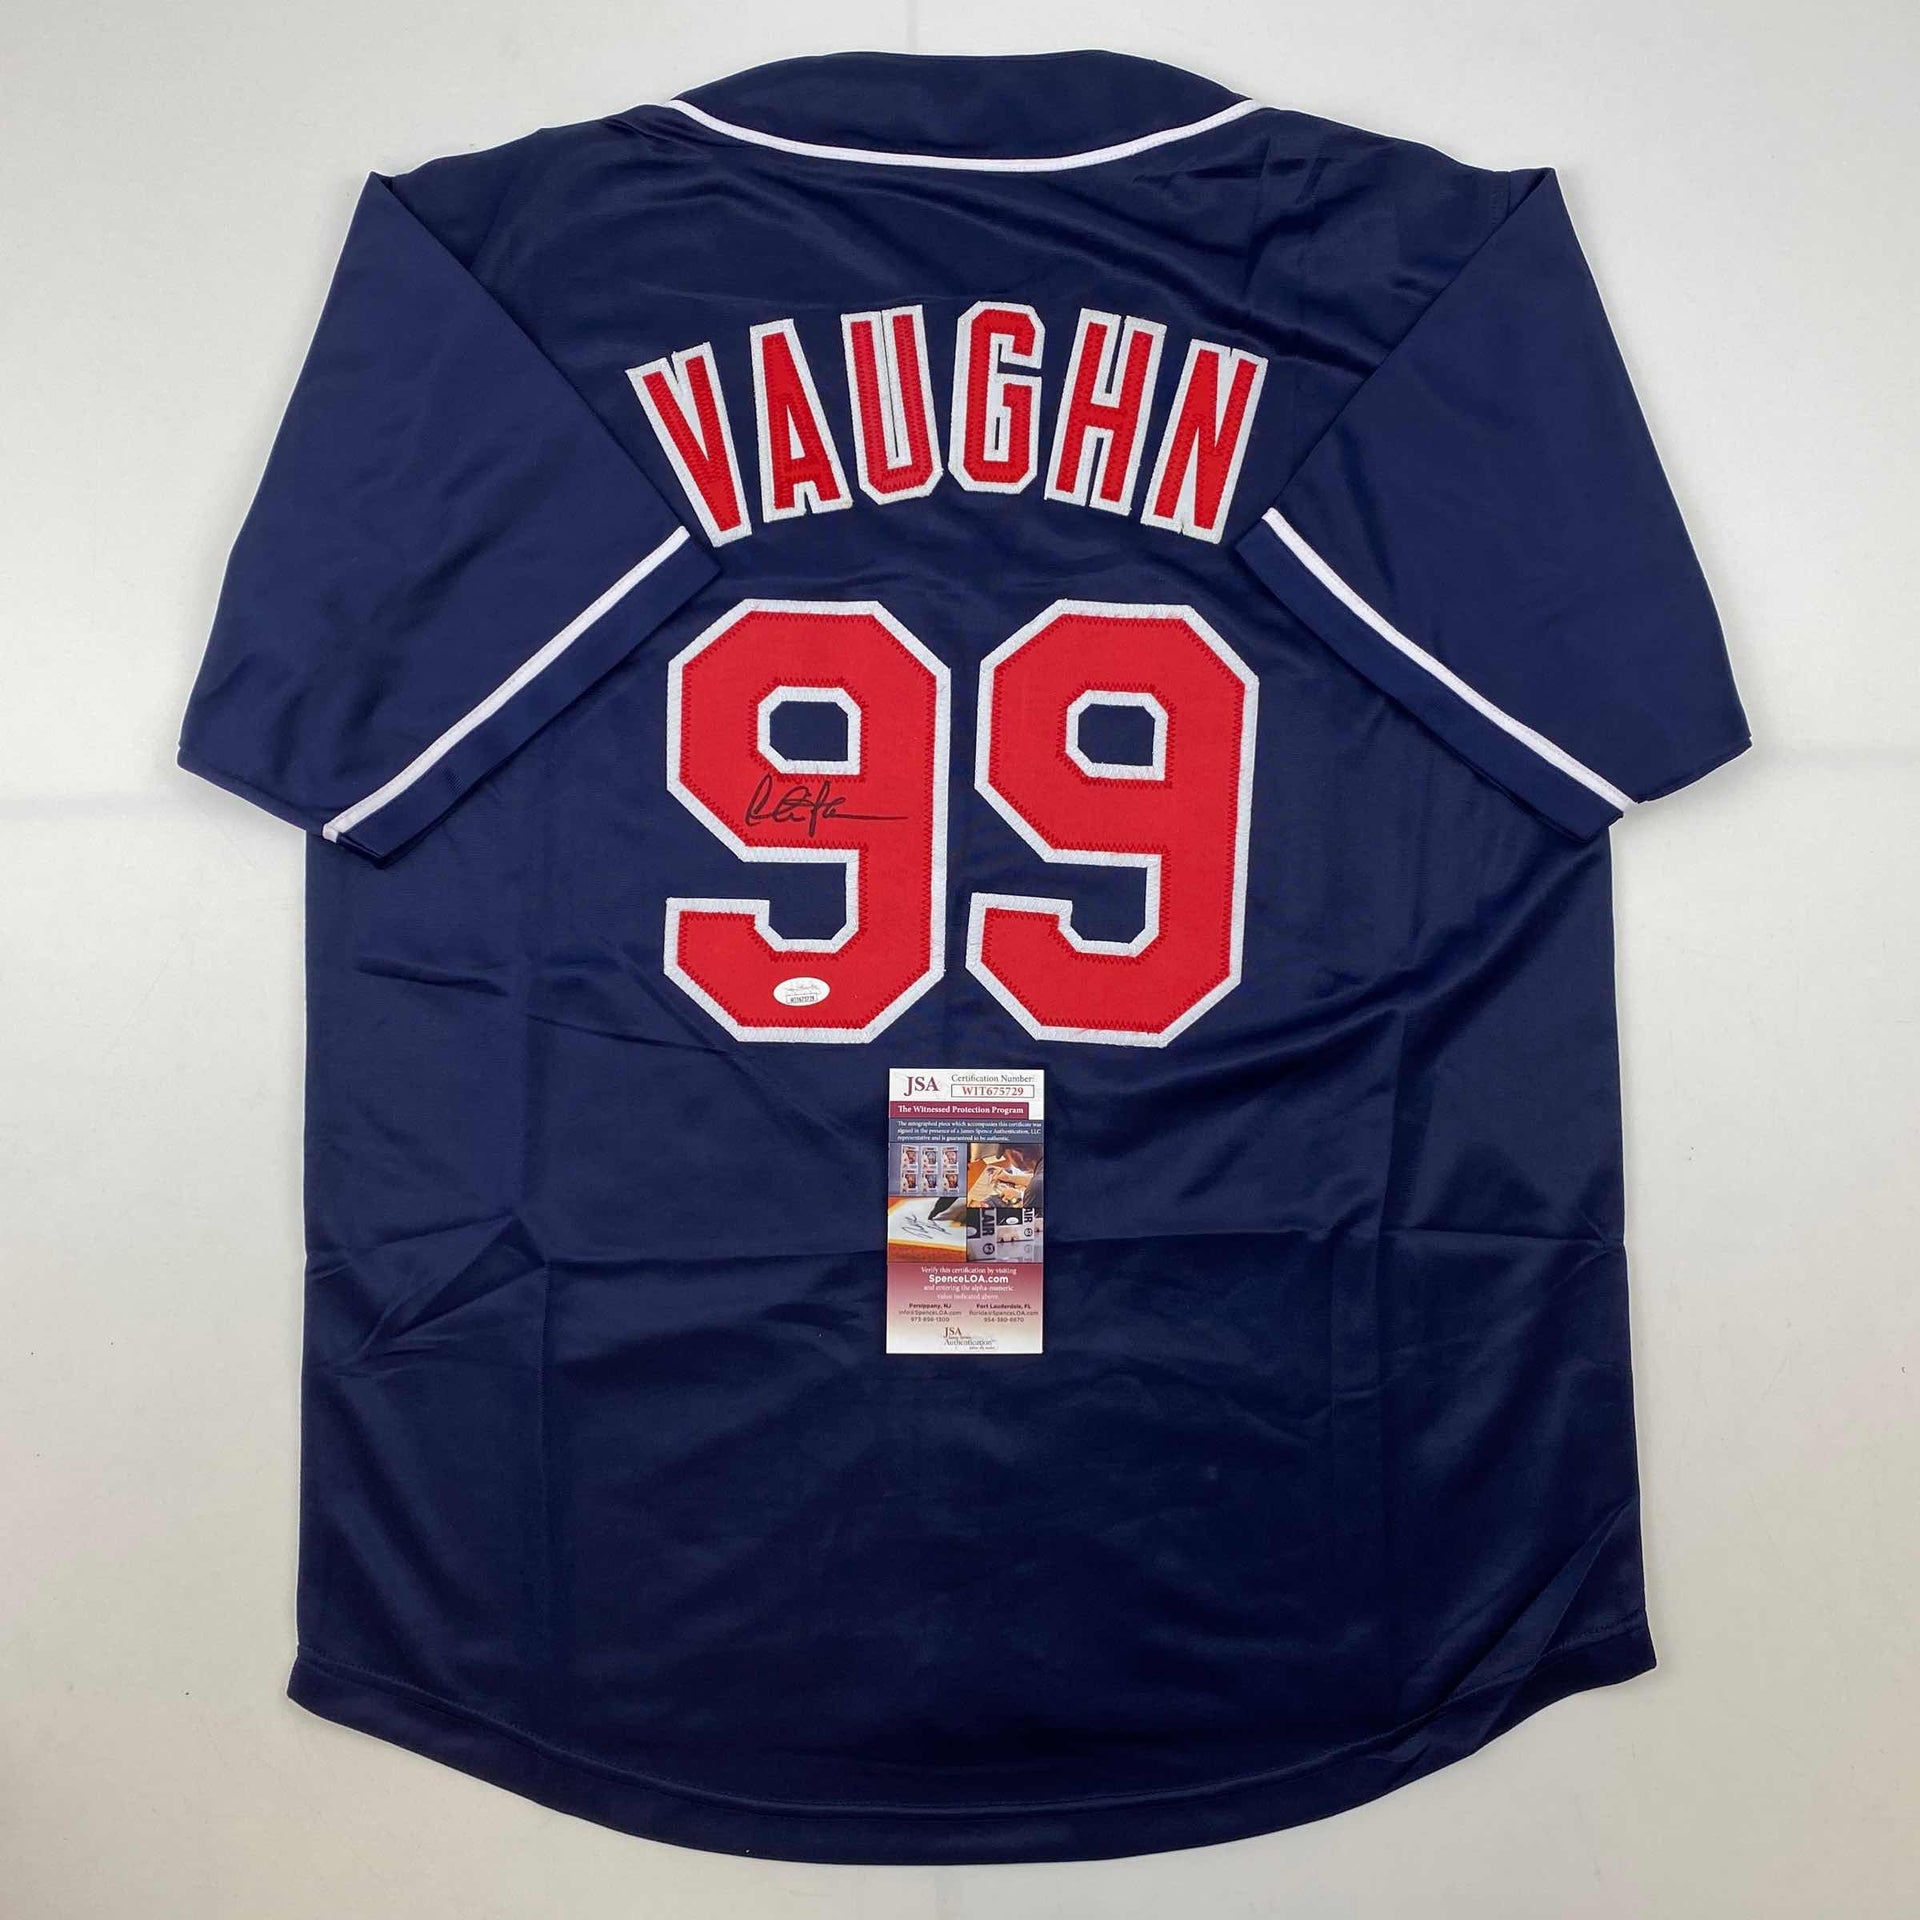 Charlie Sheen Ricky Vaughn Cleveland Indians Signed Autograph Major League  The Movie Jersey JSA Witnessed Certified